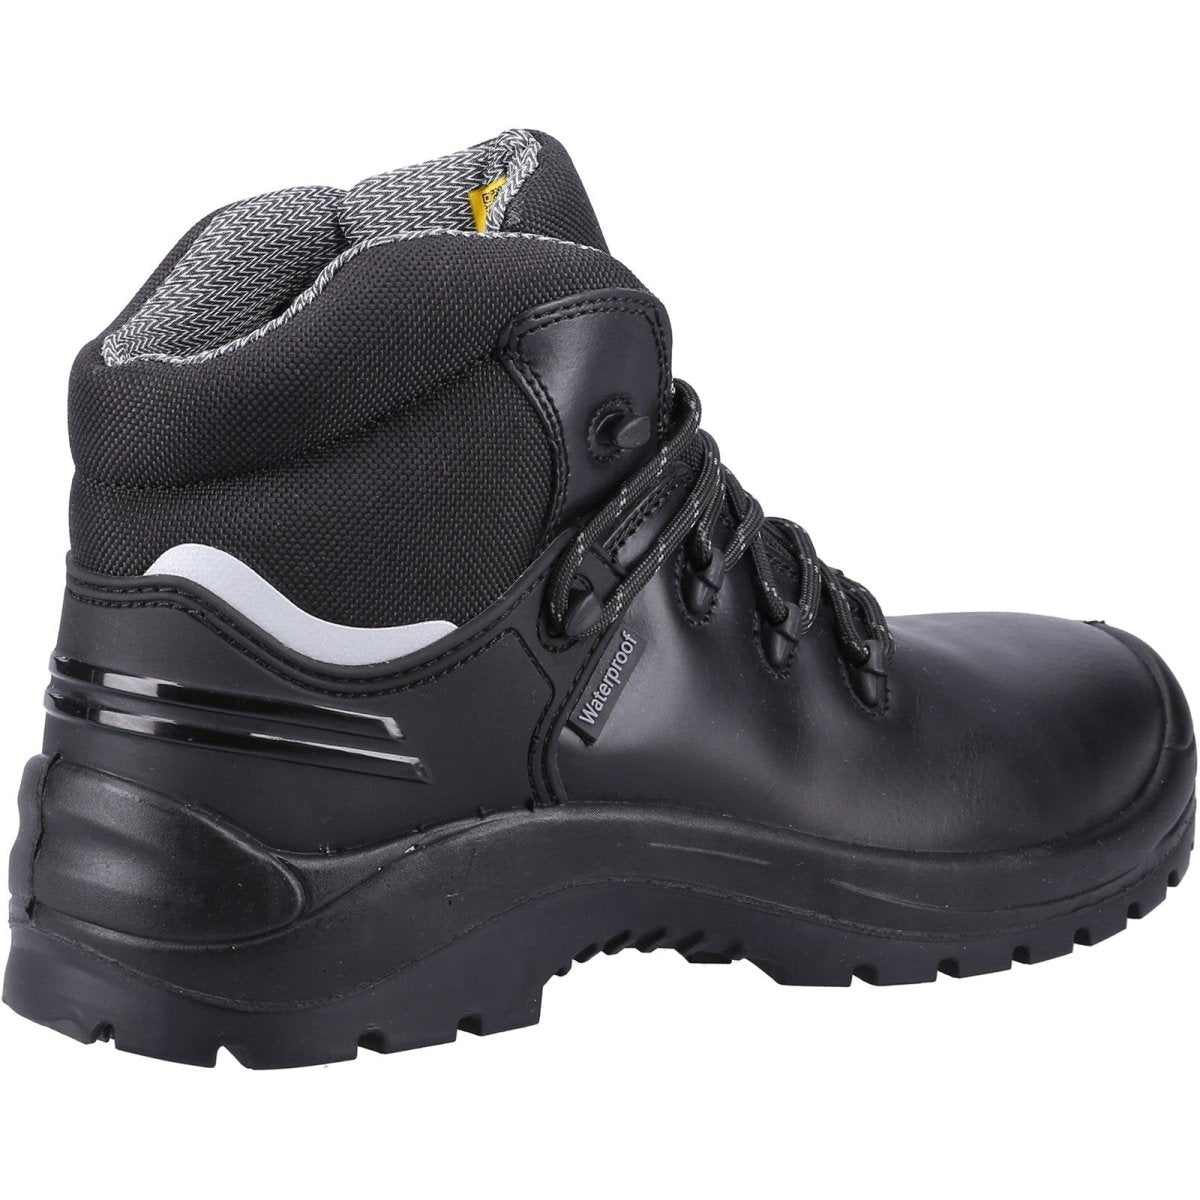 Safety Jogger X430 S3 Waterproof Safety Footwear - Shoe Store Direct